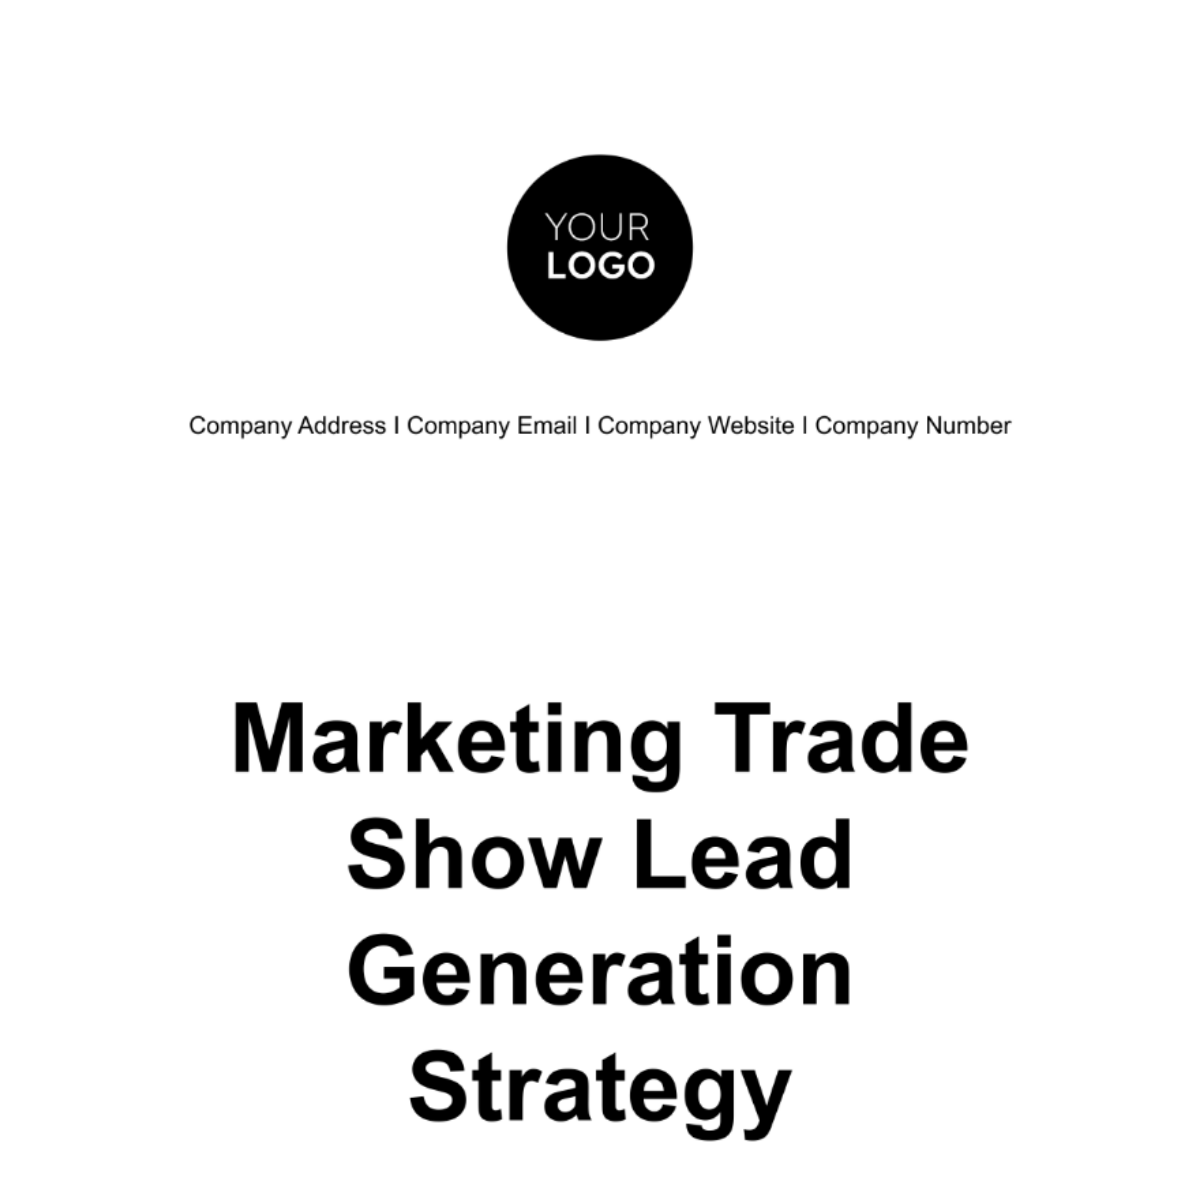 Marketing Trade Show Lead Generation Strategy Template